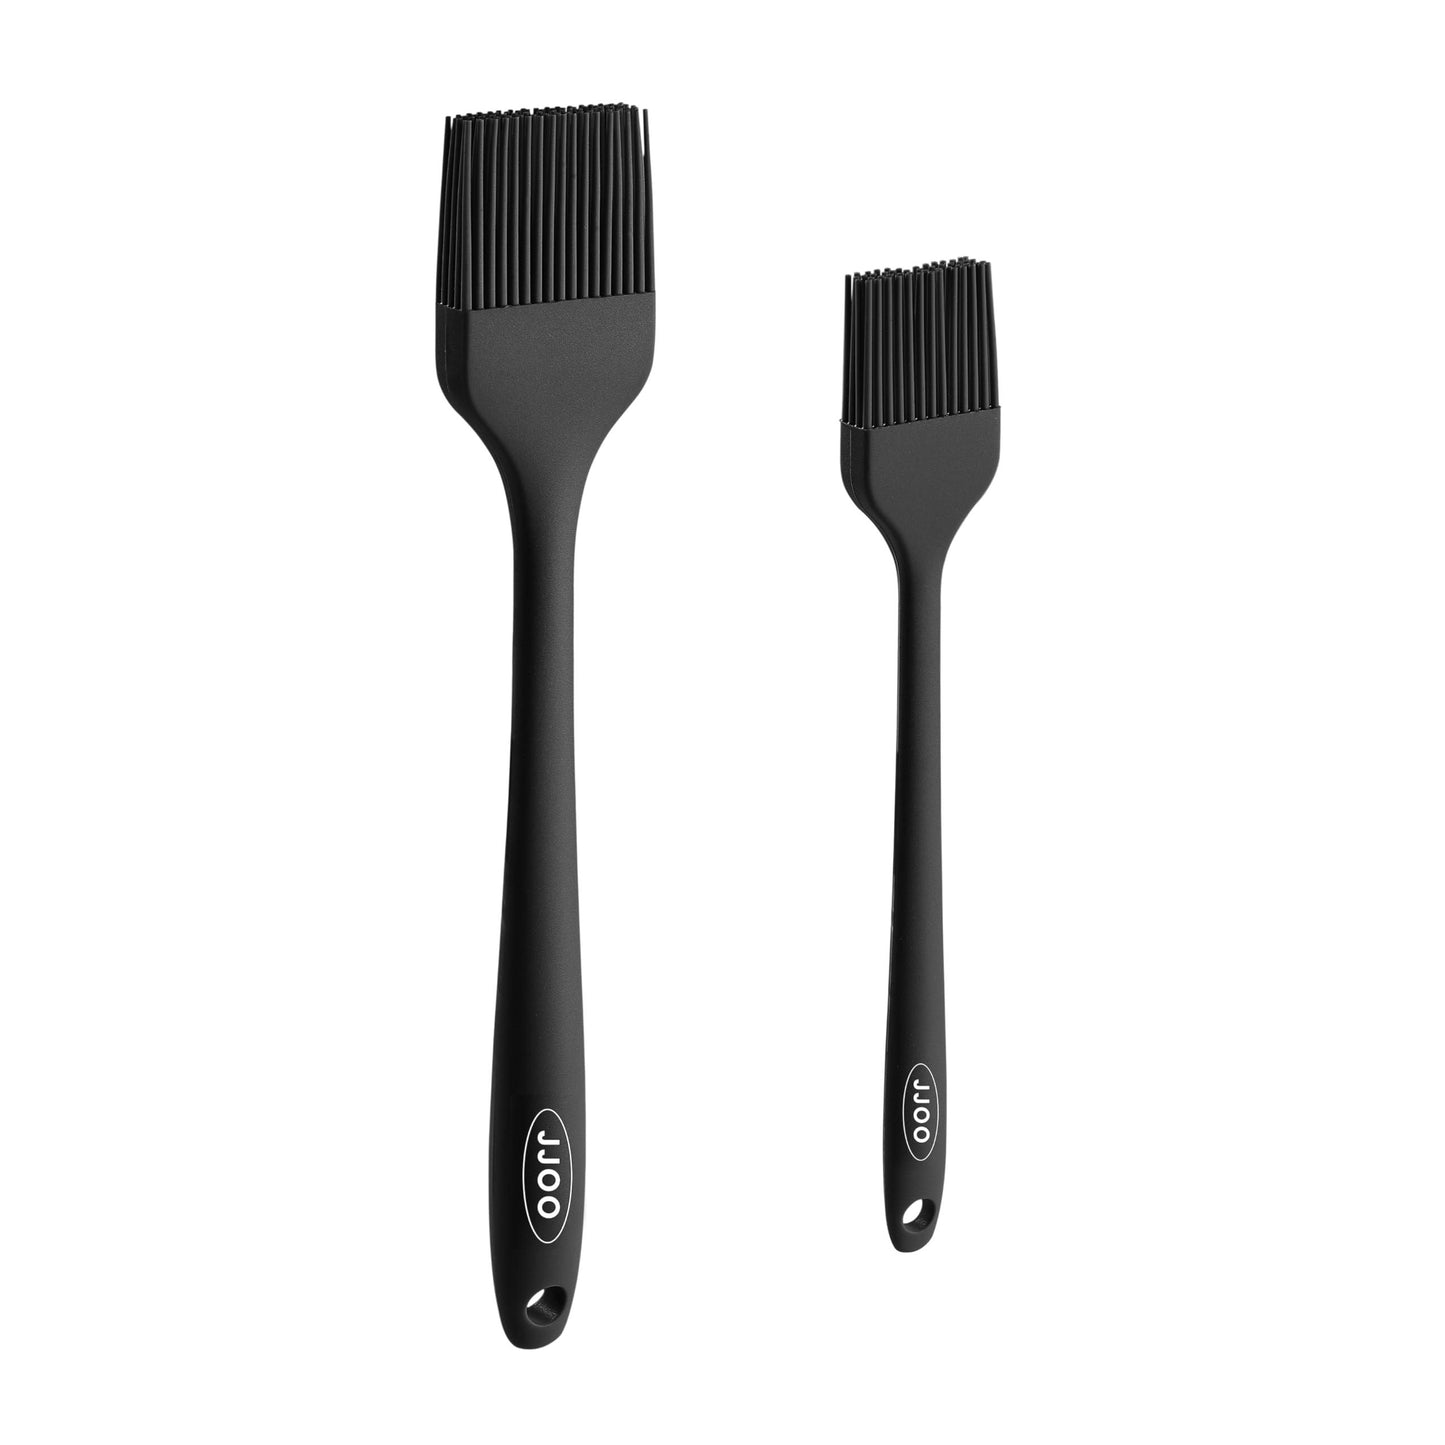 2PCS Silicone Basting Pastry Brush, JJOO Heat Resistant Food Cooking Brush for Oil, Sauce, Baking, BBQ and Grill, BPA Free, Dishwasher Safe (2Pack, Black) - CookCave